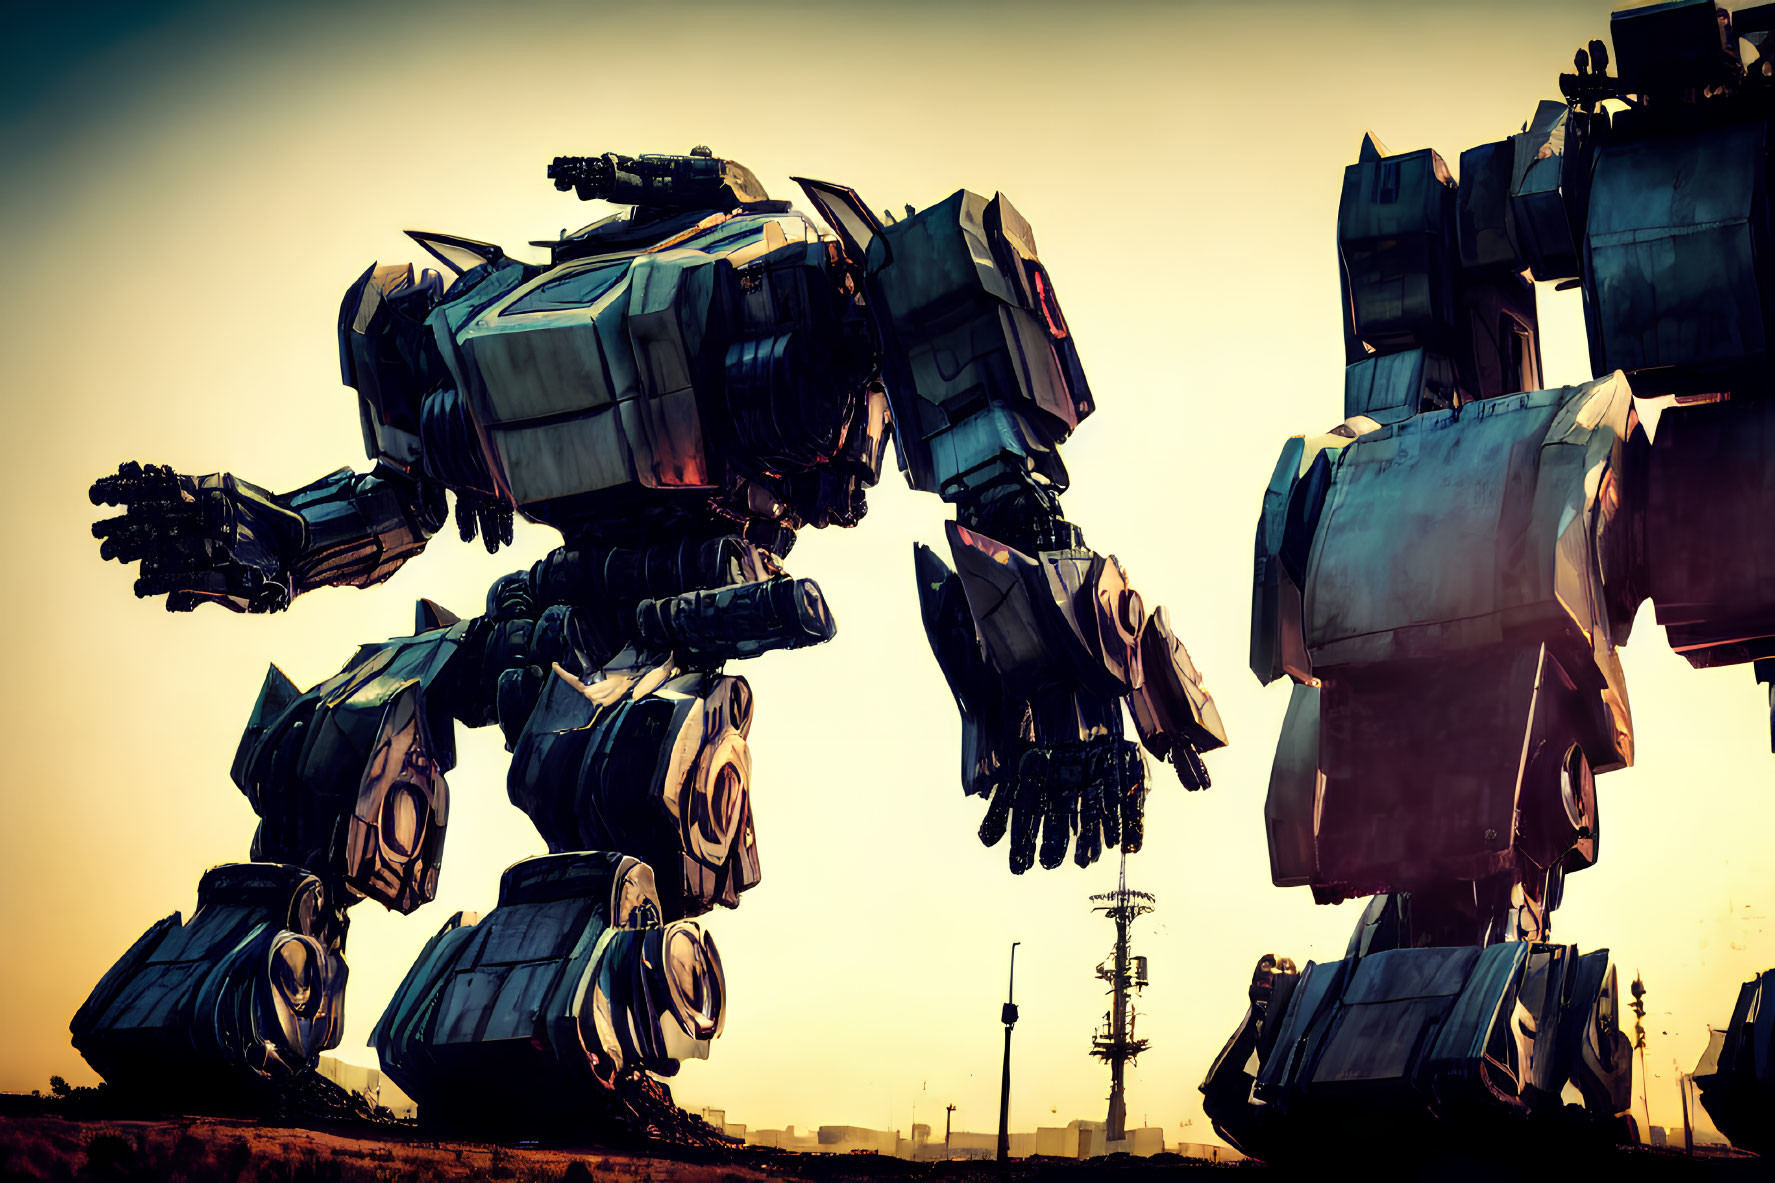 Two large bipedal robots in futuristic battlefield scene against orange-tinted sky.